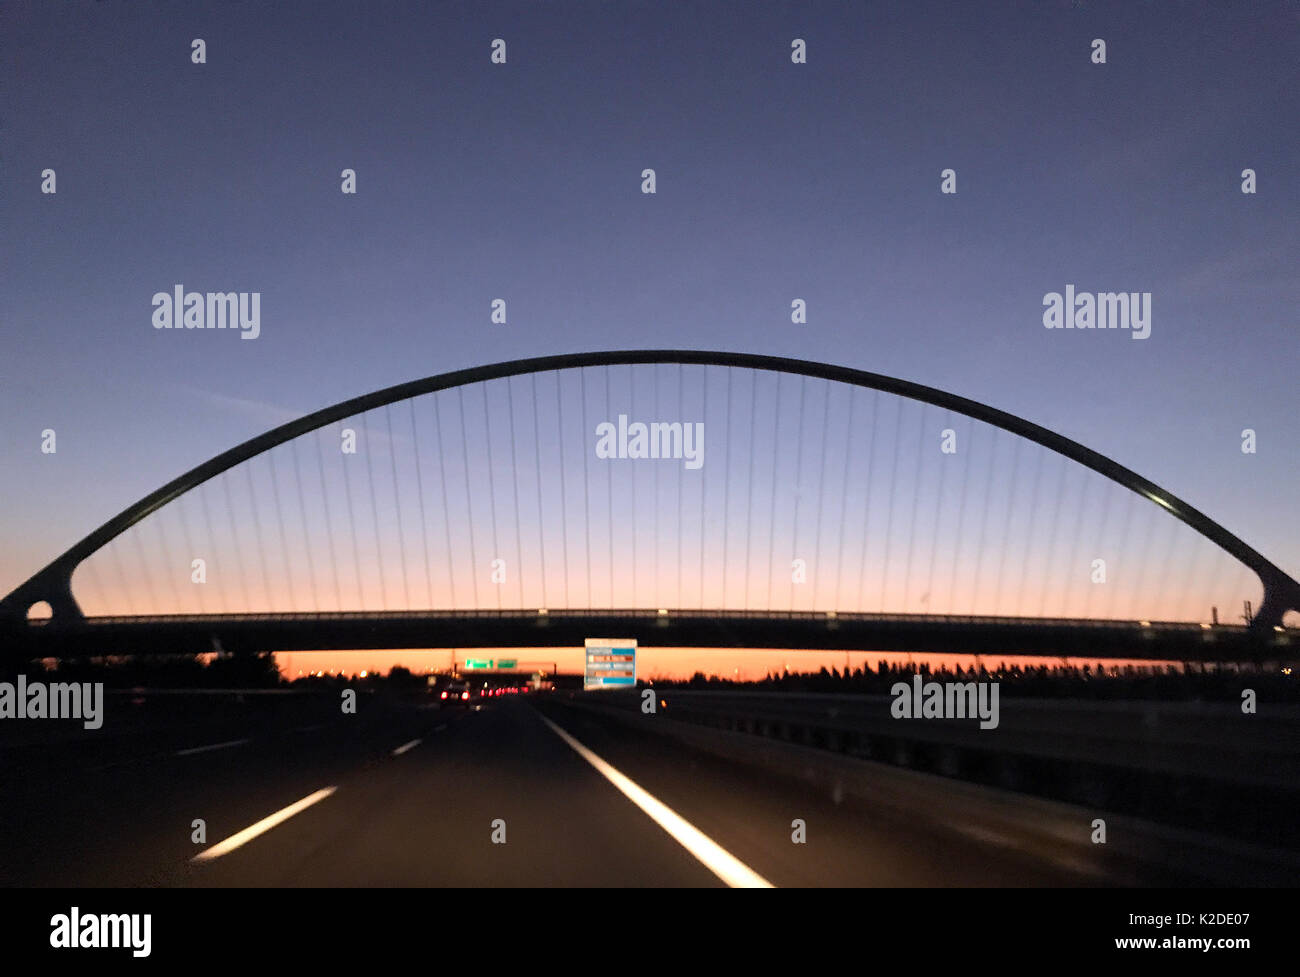 View from the car of the bridge designed by Santiago Calatrava from A1 highway, Reggio Emilia, Italy Stock Photo